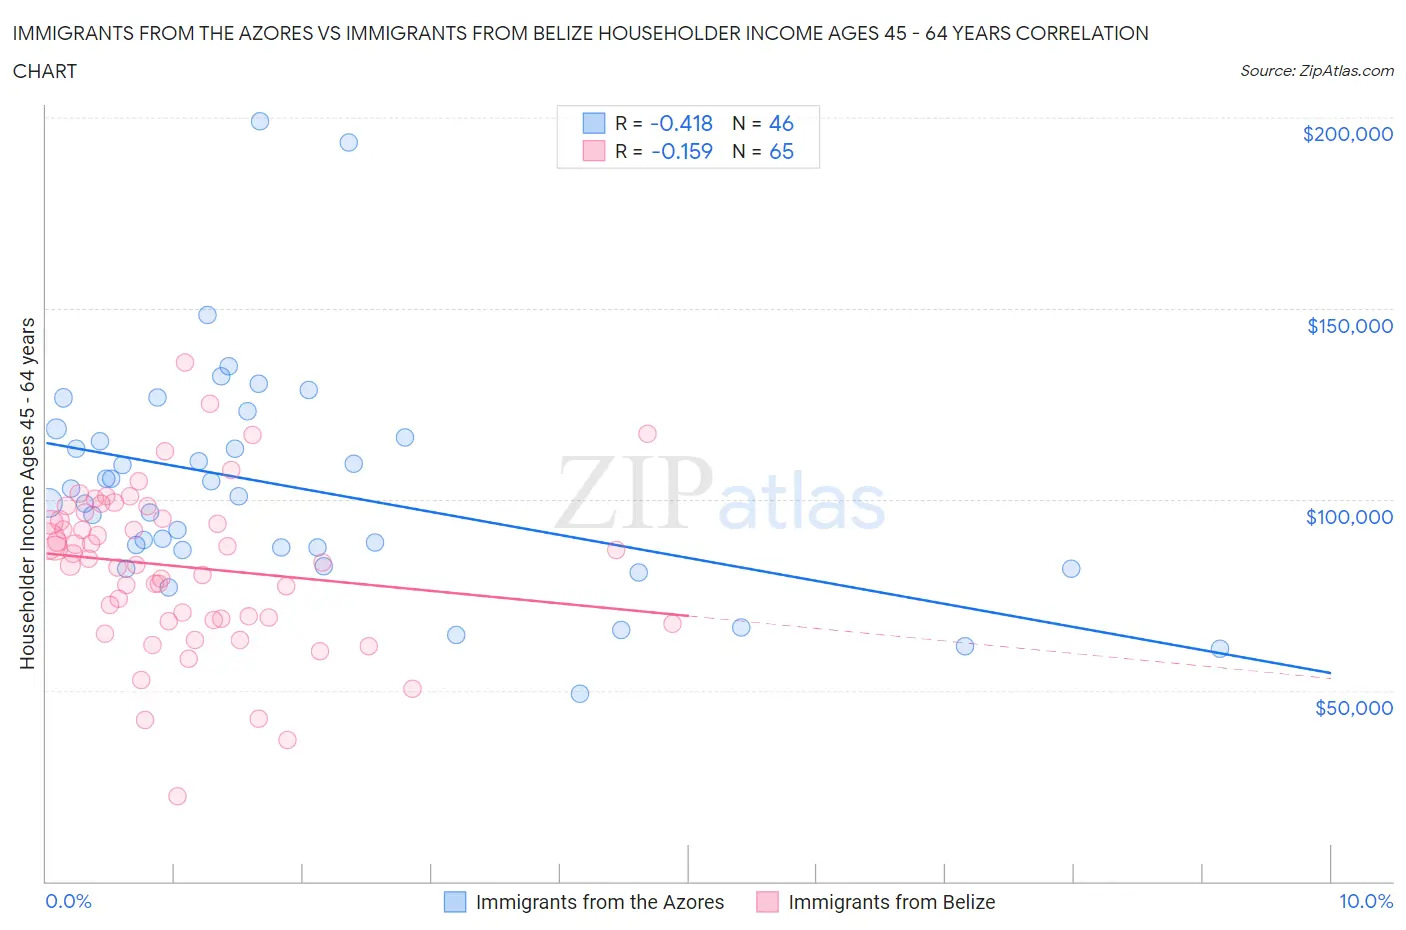 Immigrants from the Azores vs Immigrants from Belize Householder Income Ages 45 - 64 years